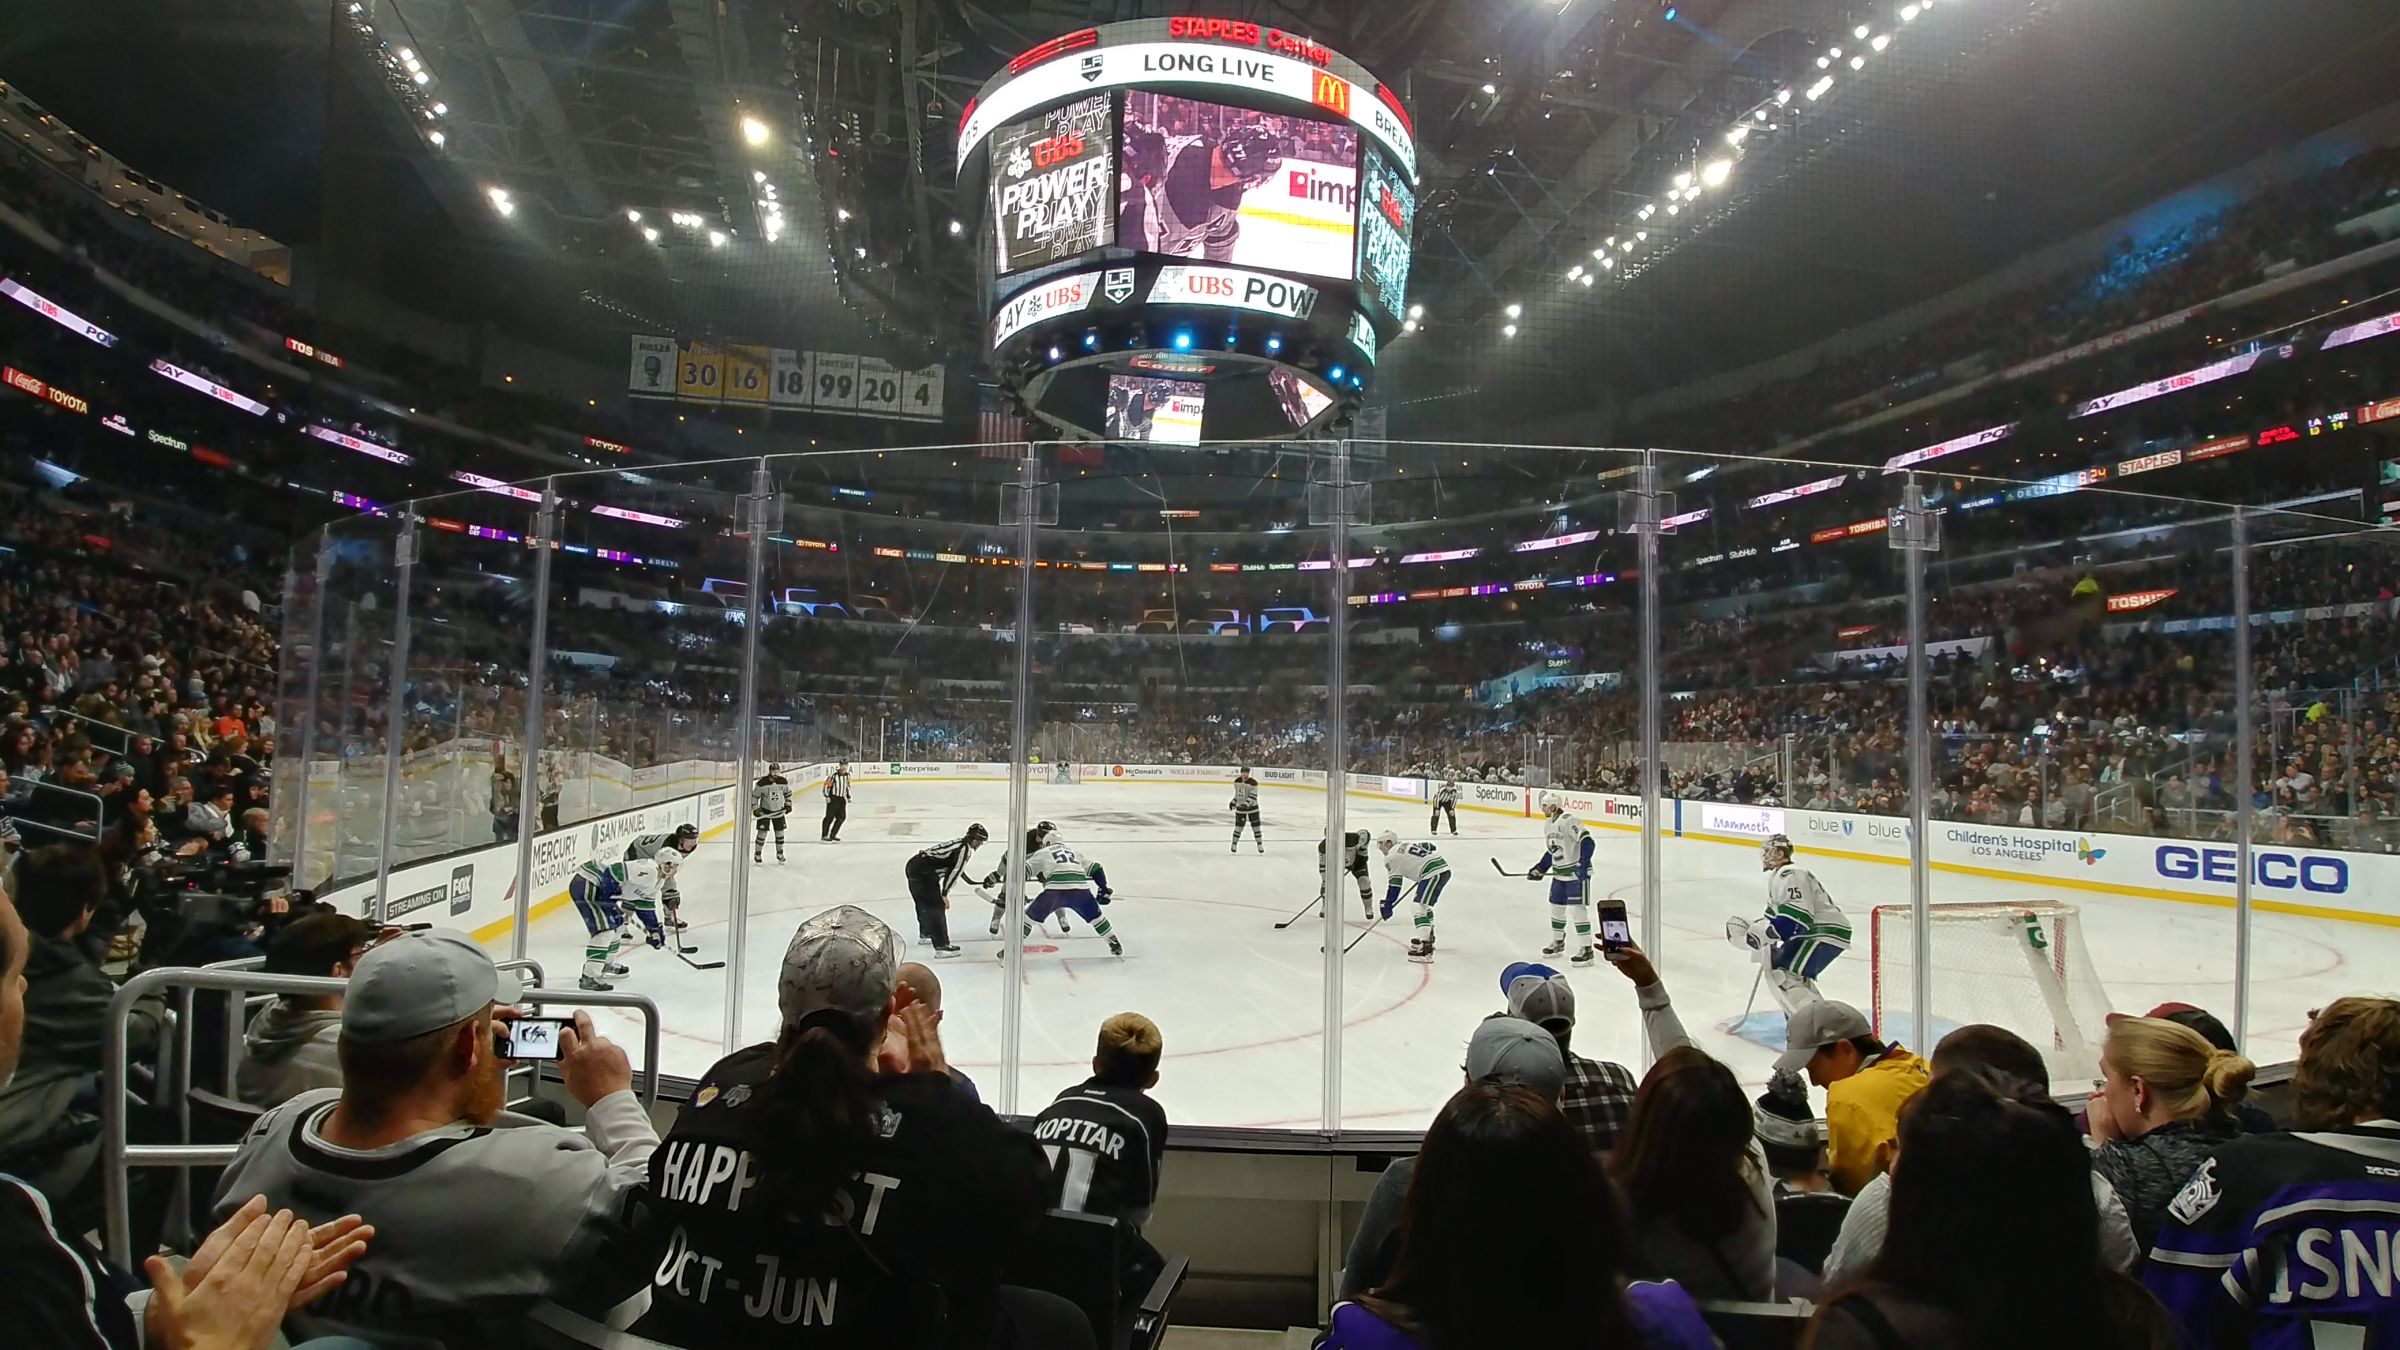 section 107, row 6 seat view  for hockey - crypto.com arena